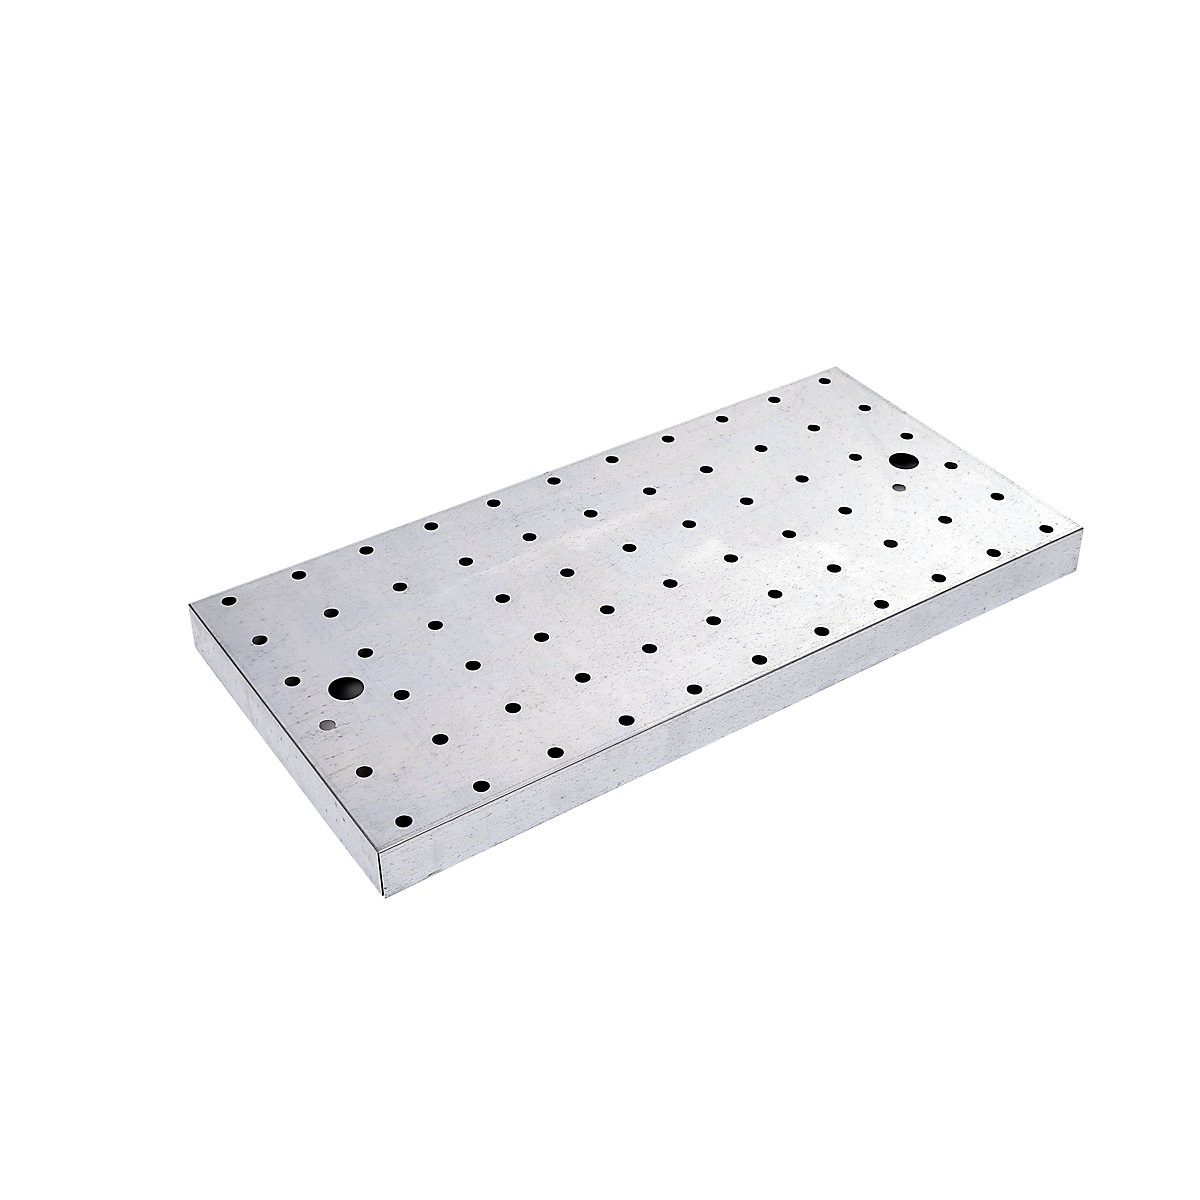 Perforated metal cover - eurokraft pro